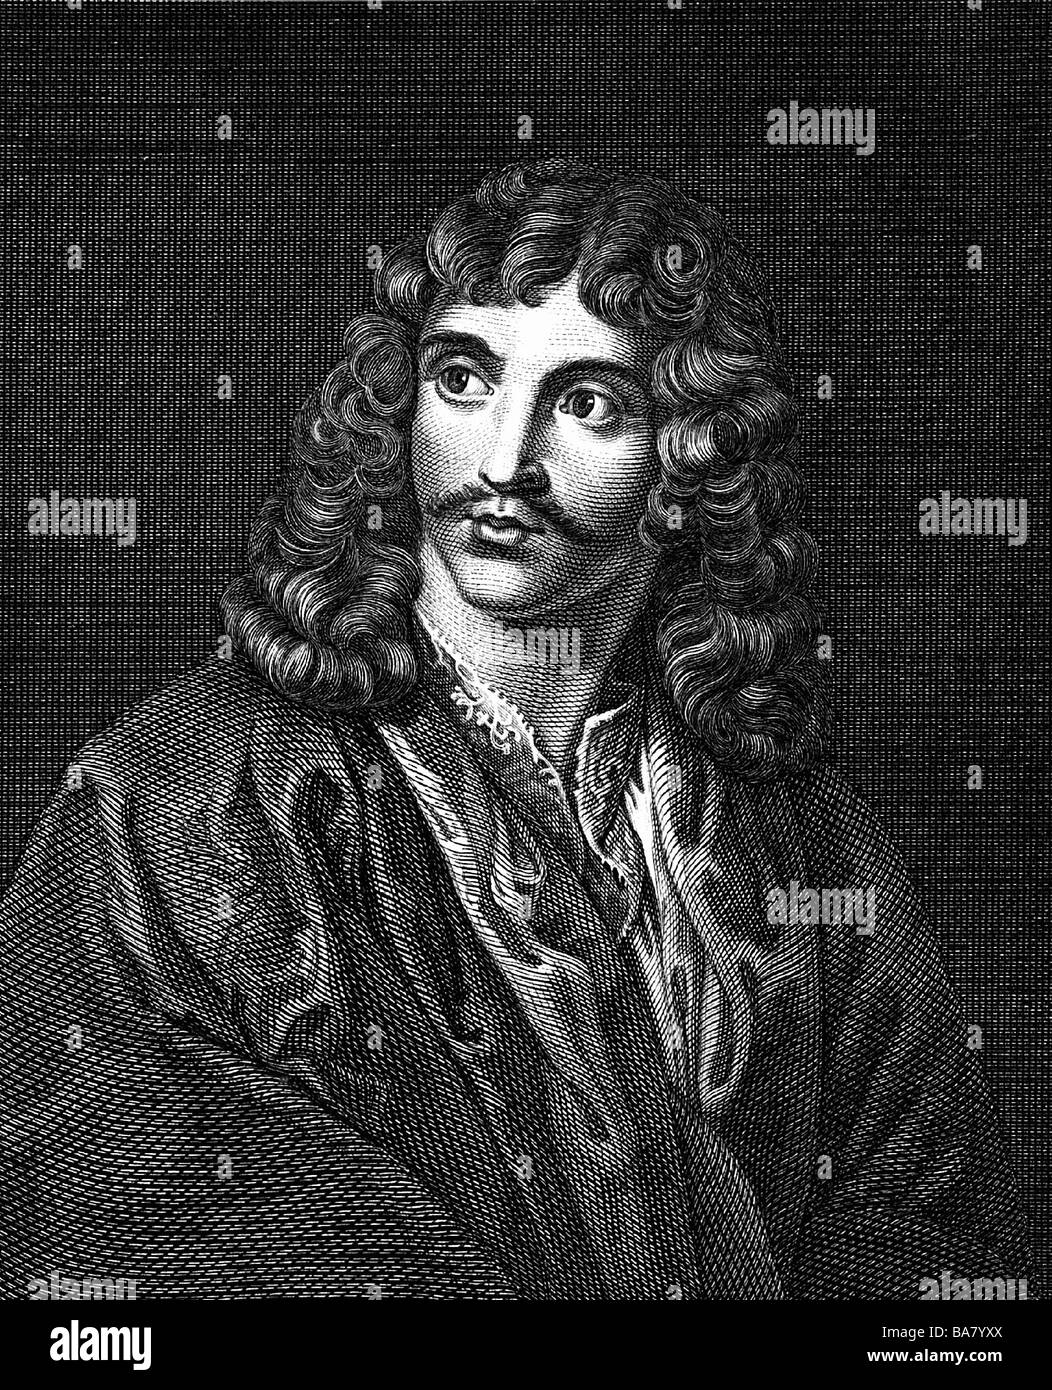 Moliere, 15.1.1622 - 17.2.1673, French author/writer and theatre director, portrait, wood engraving after contemporary image, Stock Photo